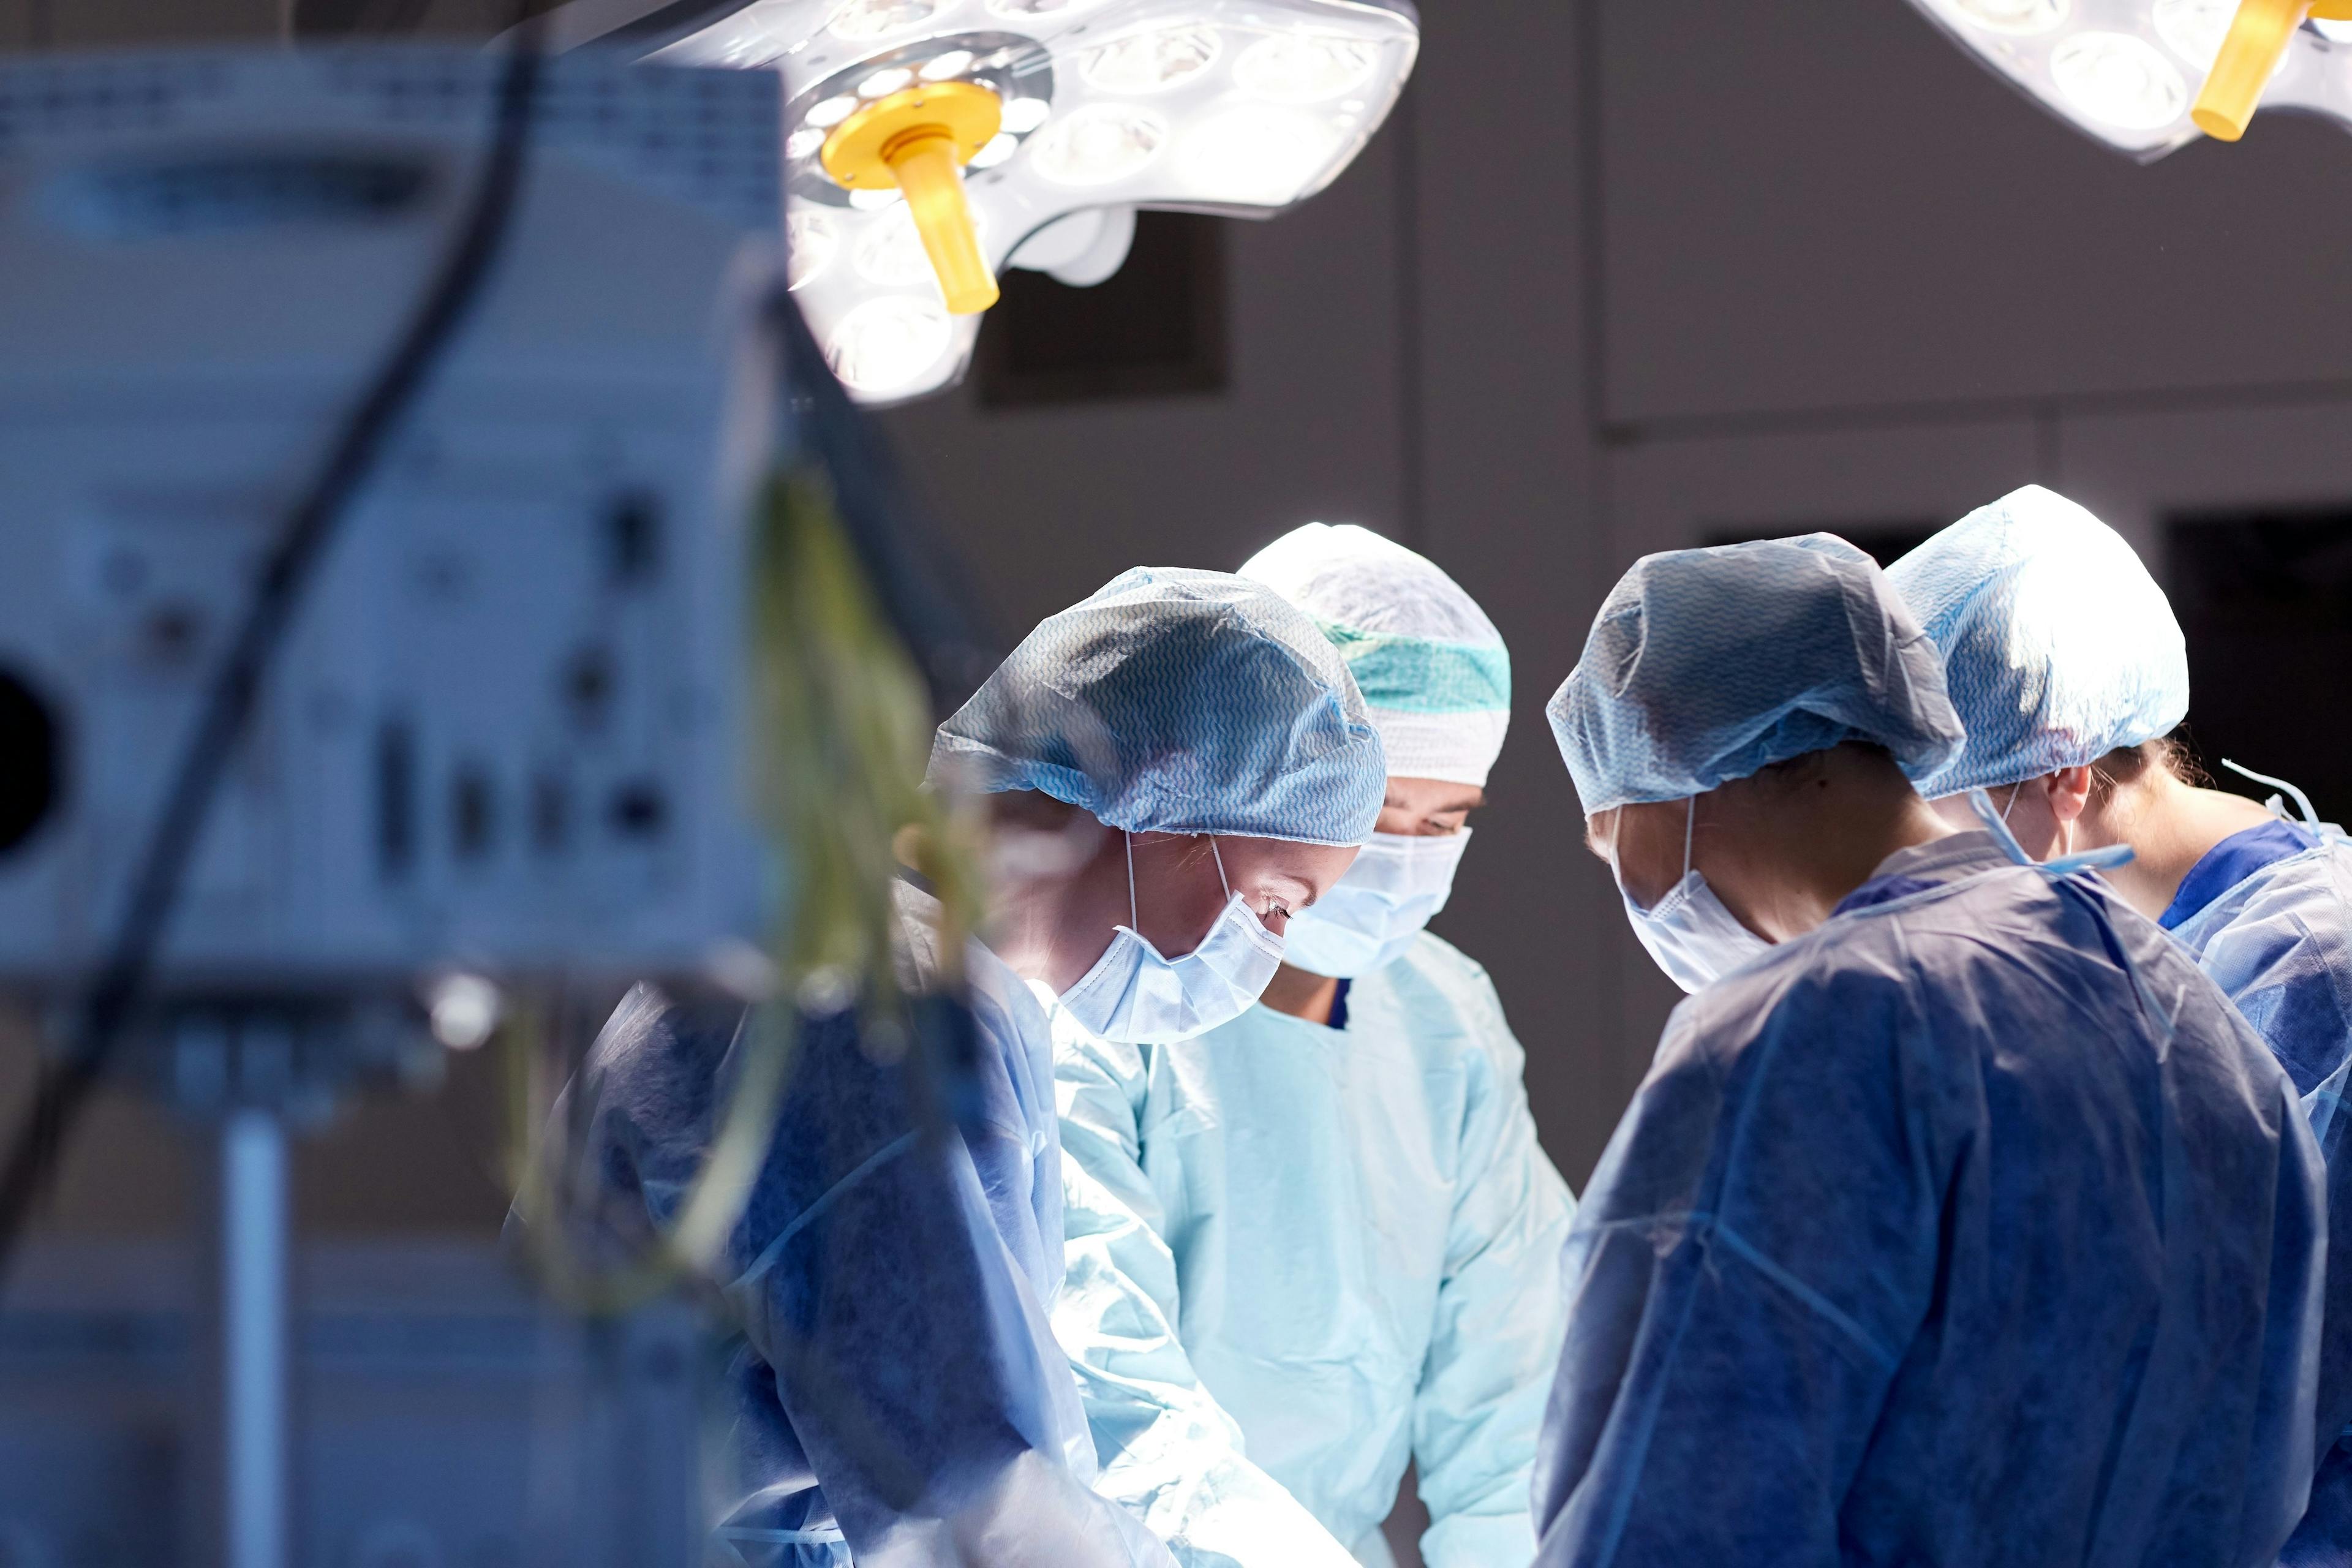 Group of surgeons in operating room | Image Credit: catinsyrup - stock.adobe.com